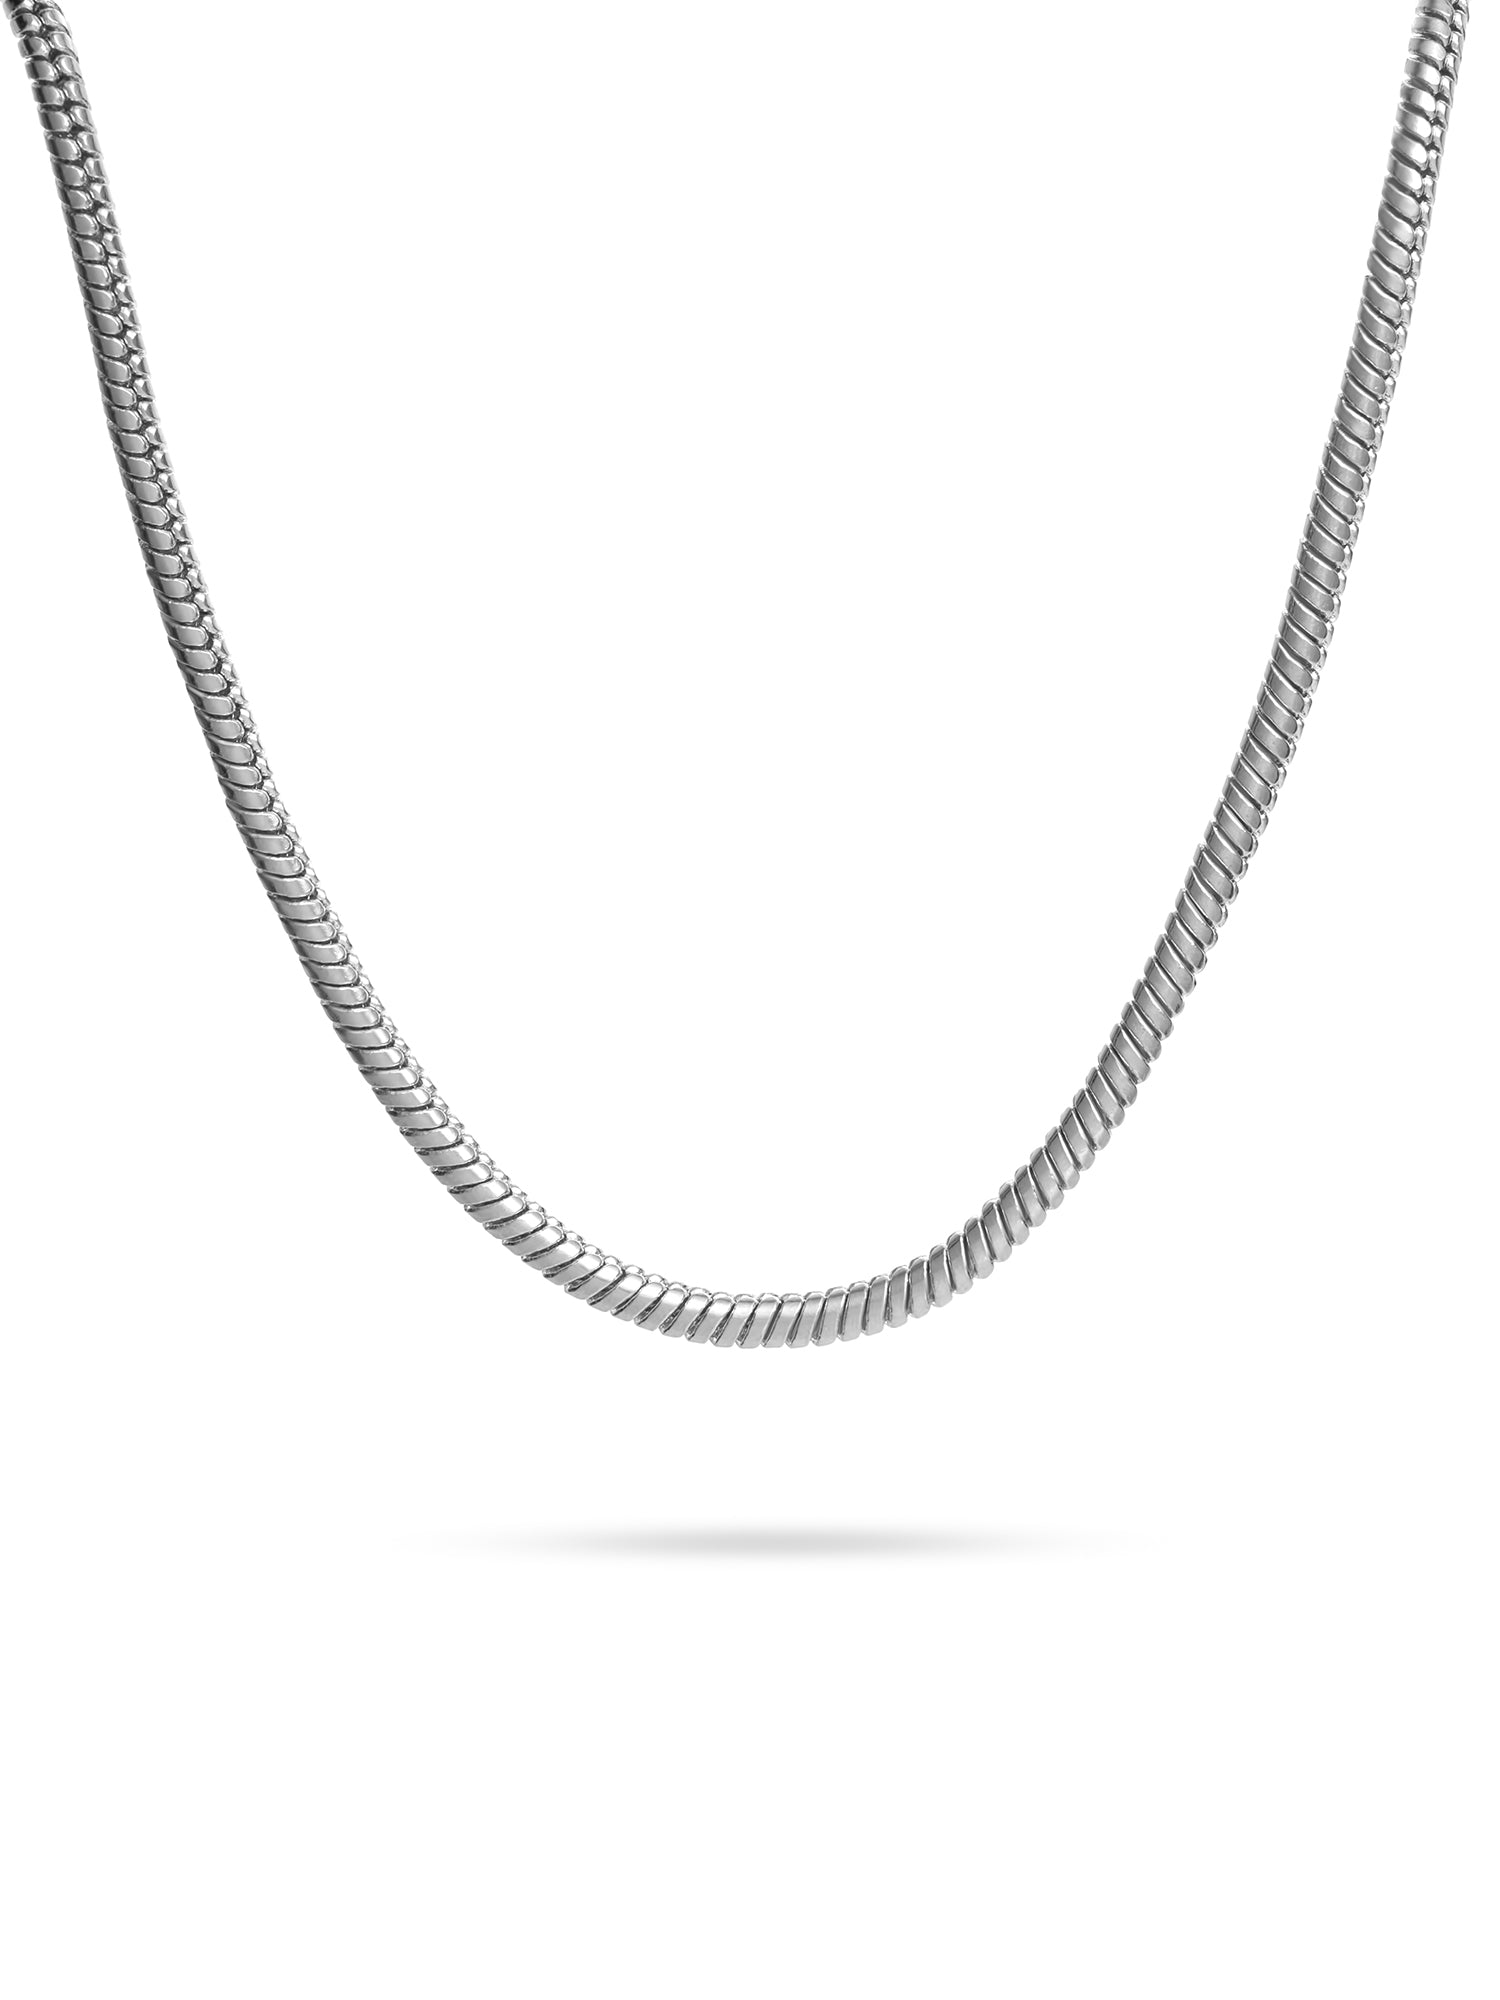 Round Snake Chain Necklace, White Gold 18"